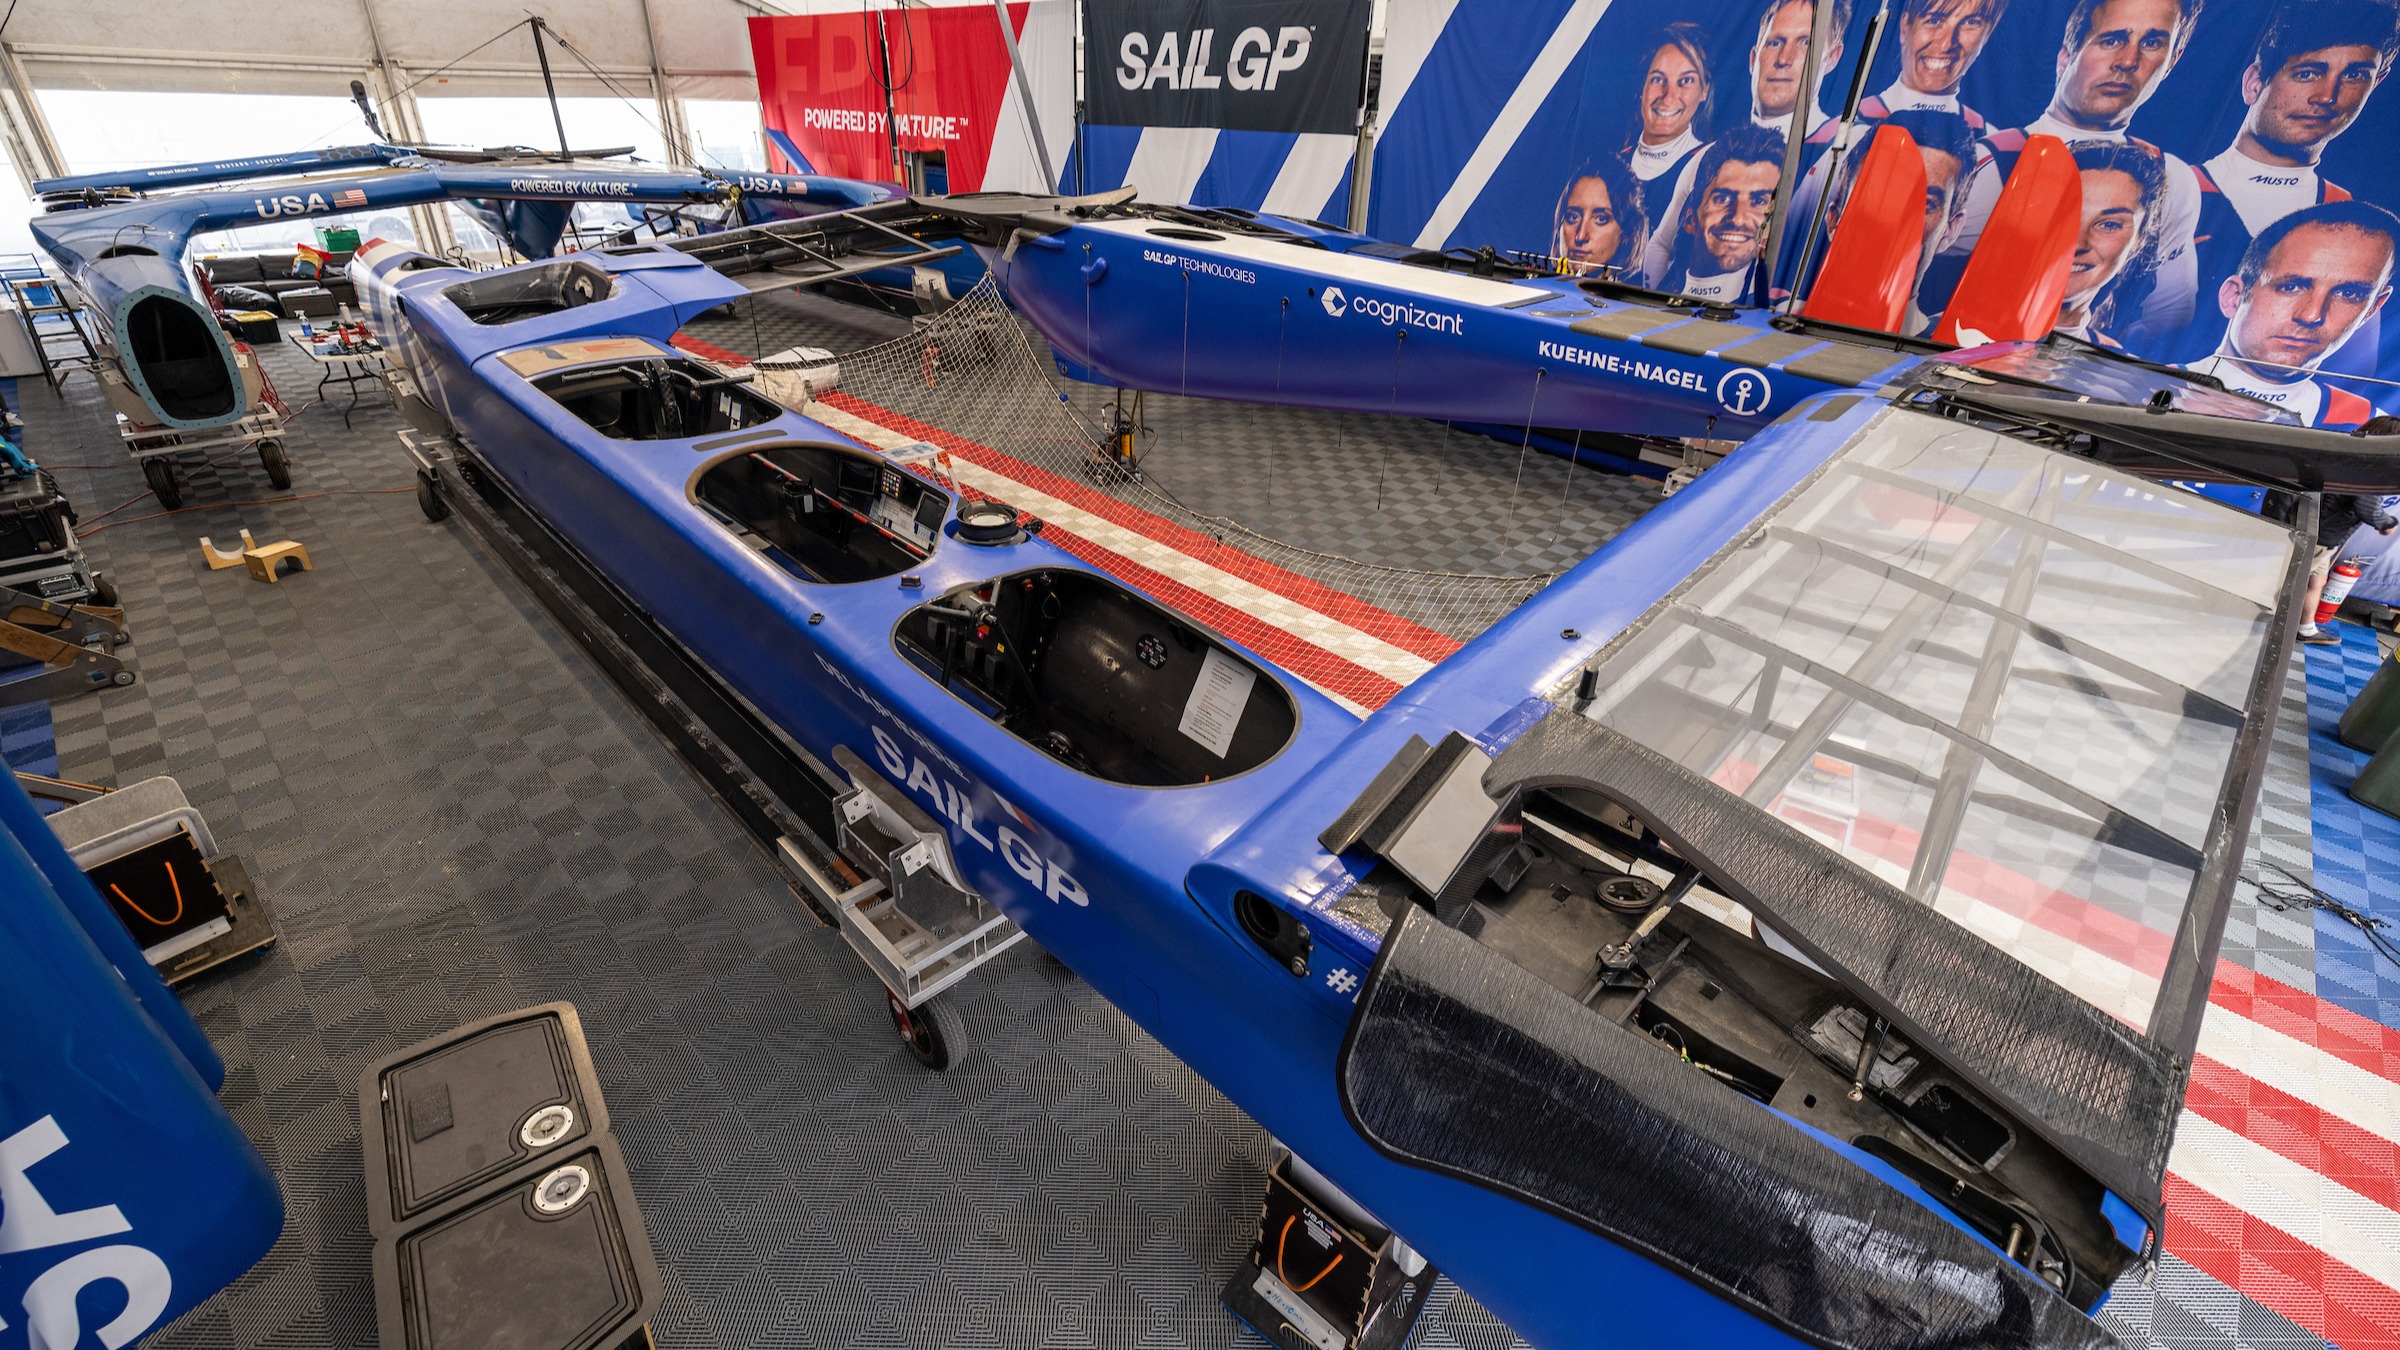 Season 3 // New Zealand Sail Grand Prix // Wing shed in event build up